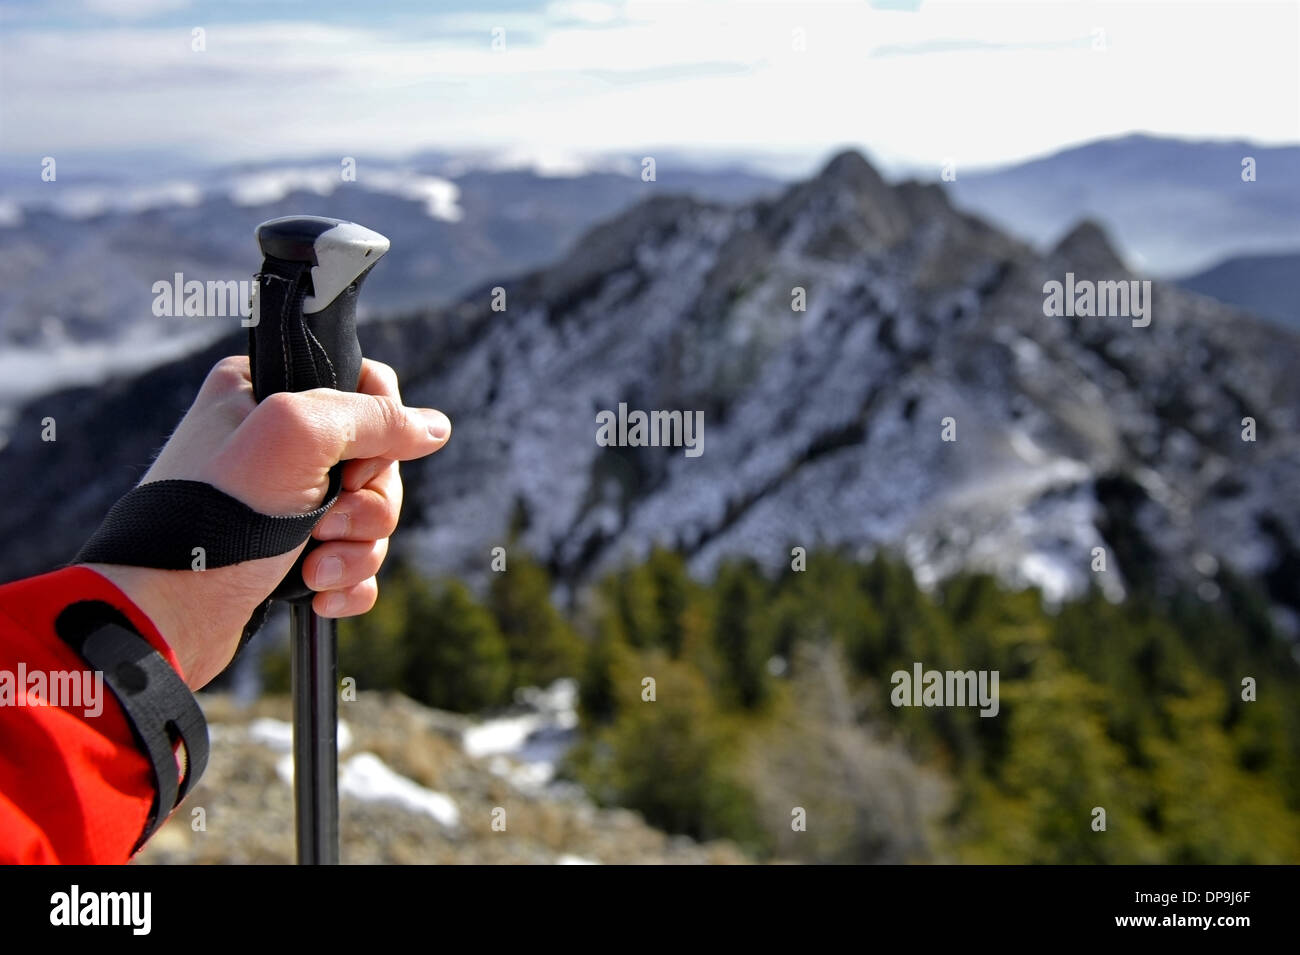 Hand of a man holding a hiking pole on top of a mountain Stock Photo